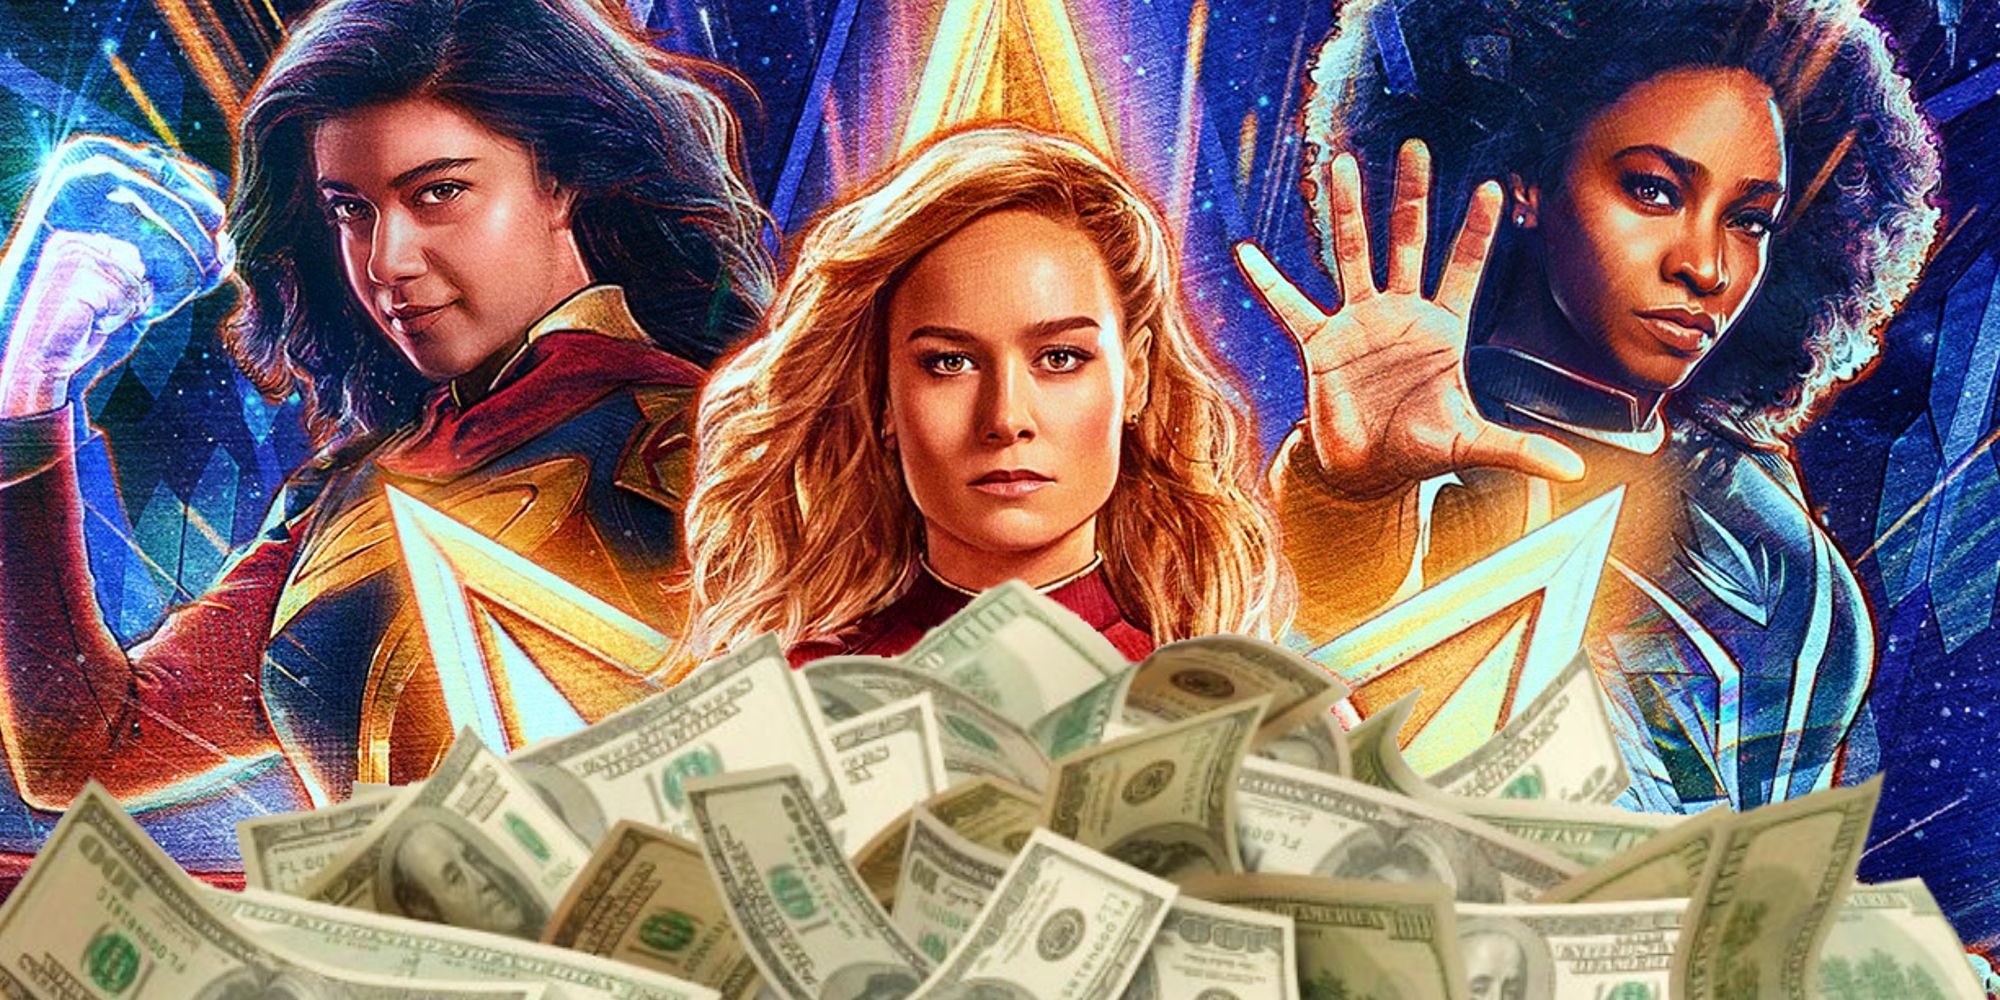 The Marvels' Budget Is Even Bigger Than Expected